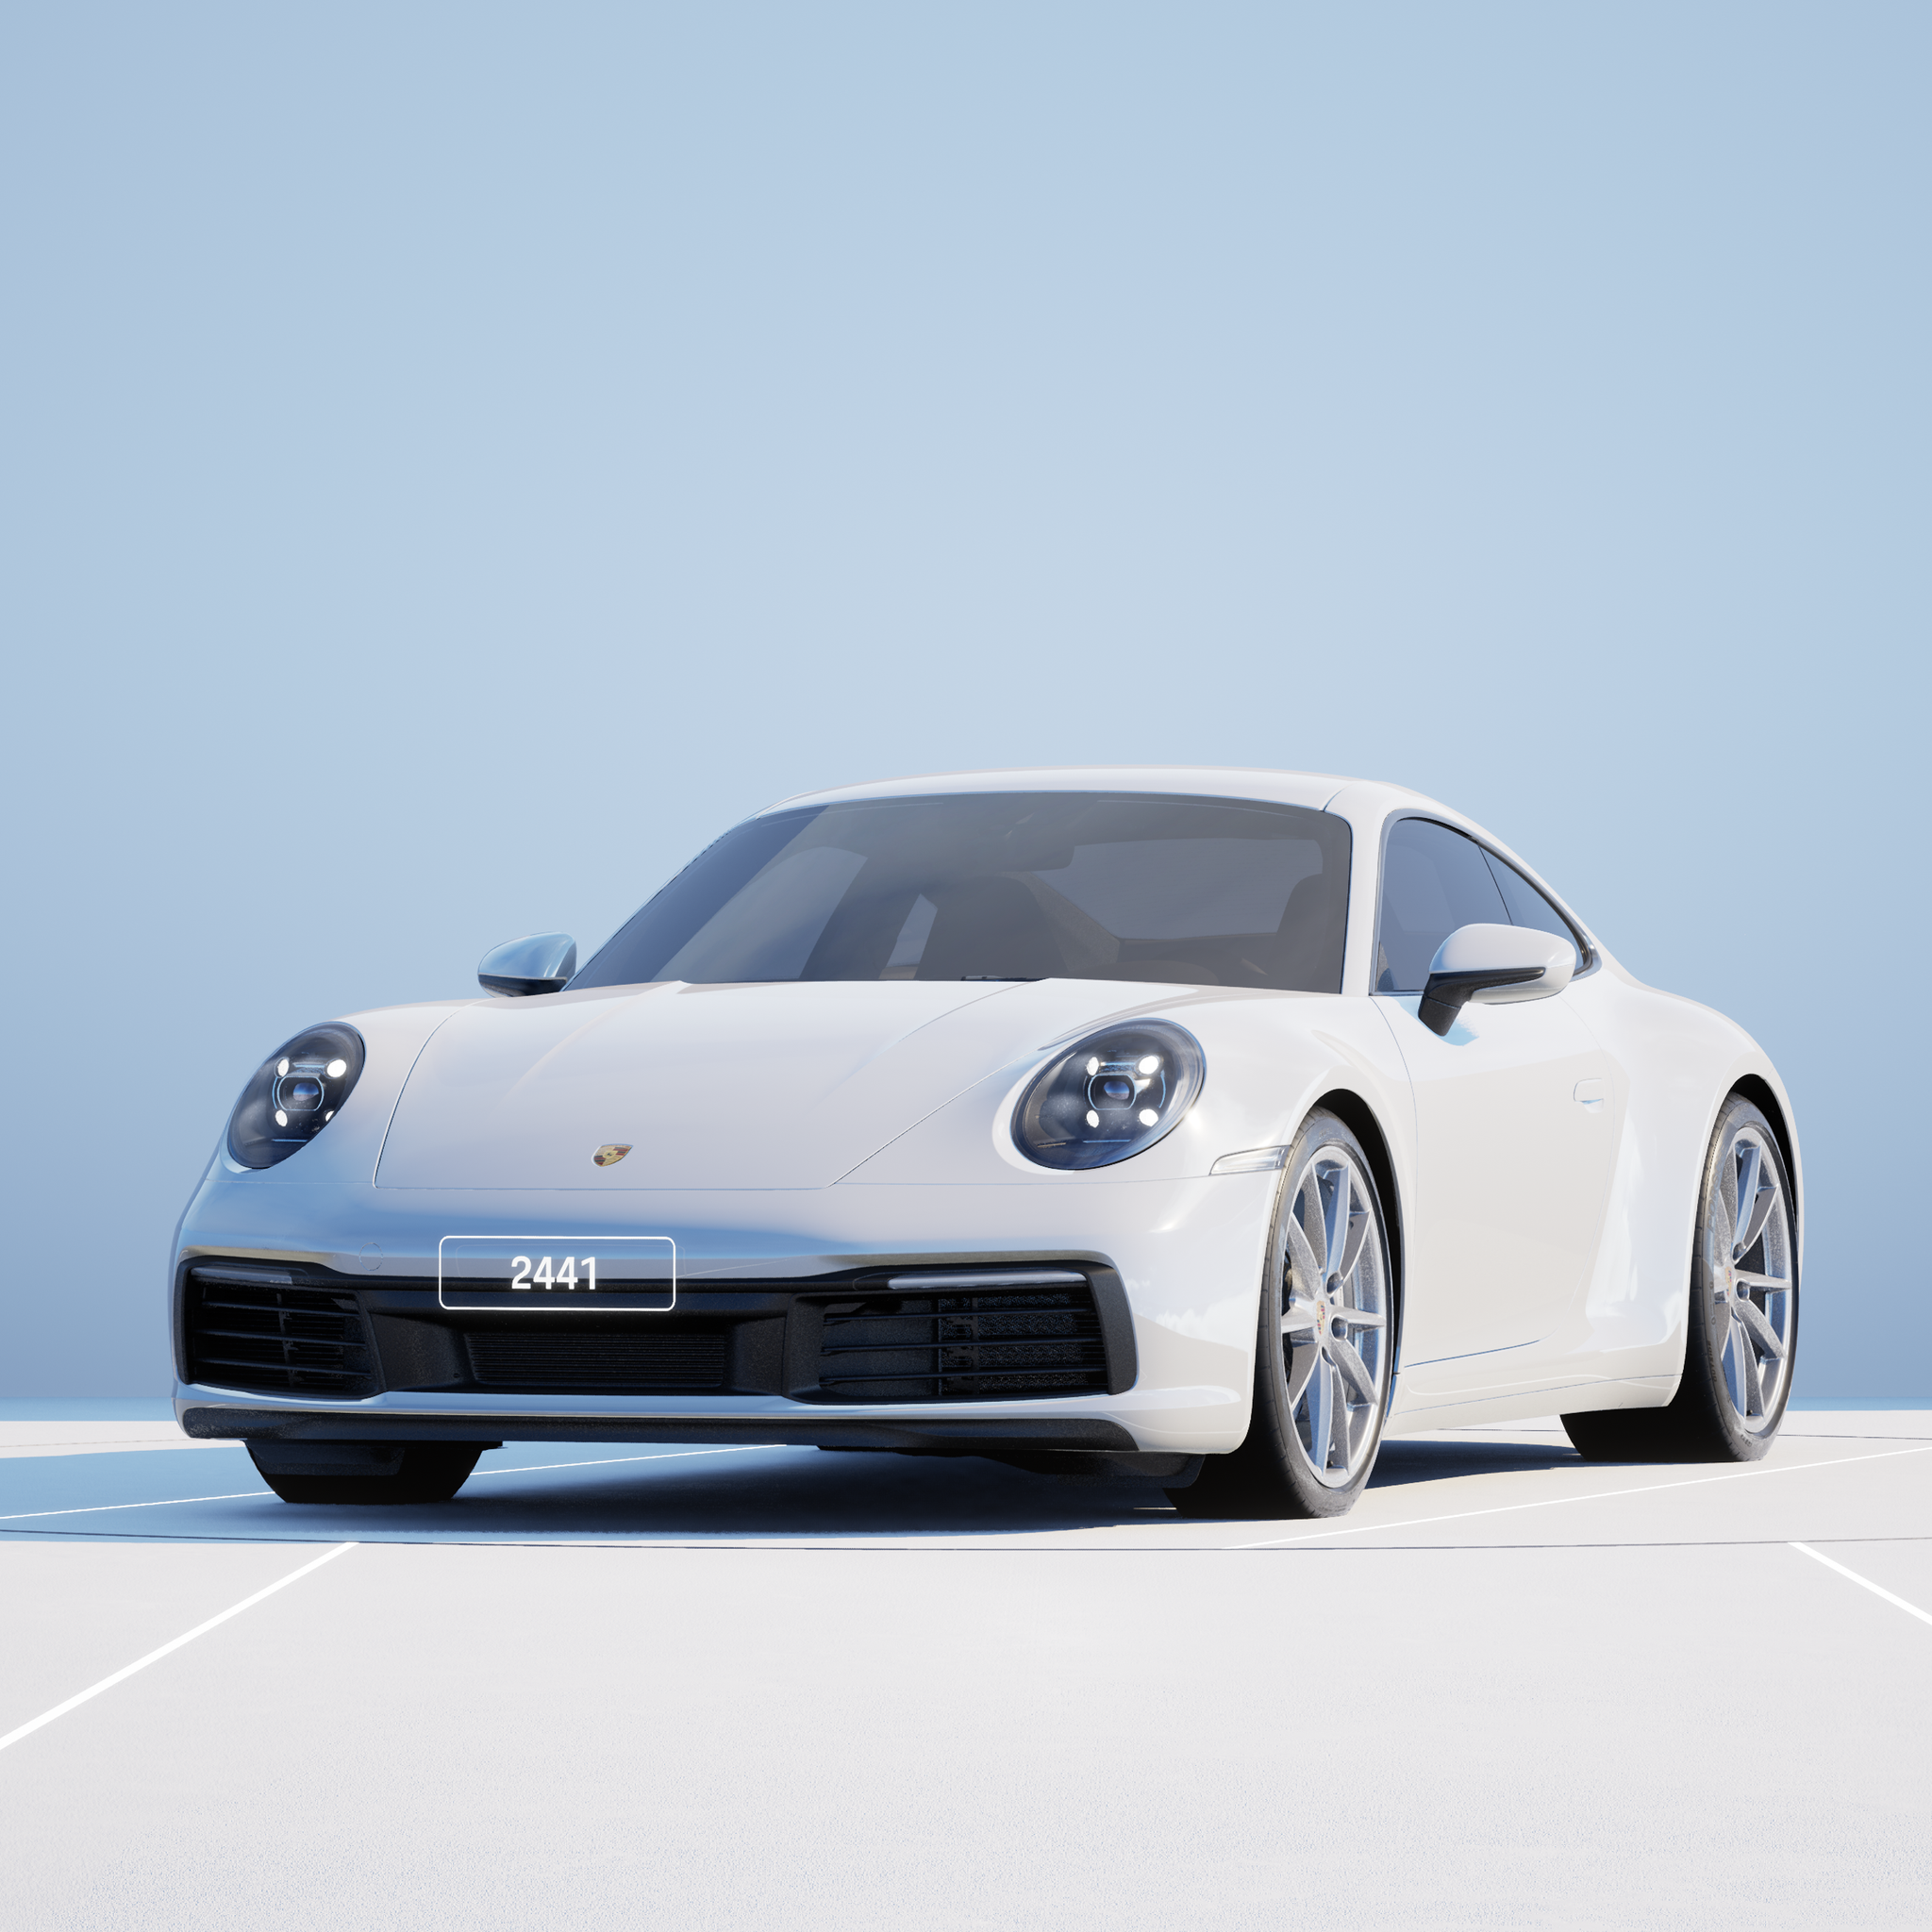 The PORSCHΞ 911 2441 image in phase